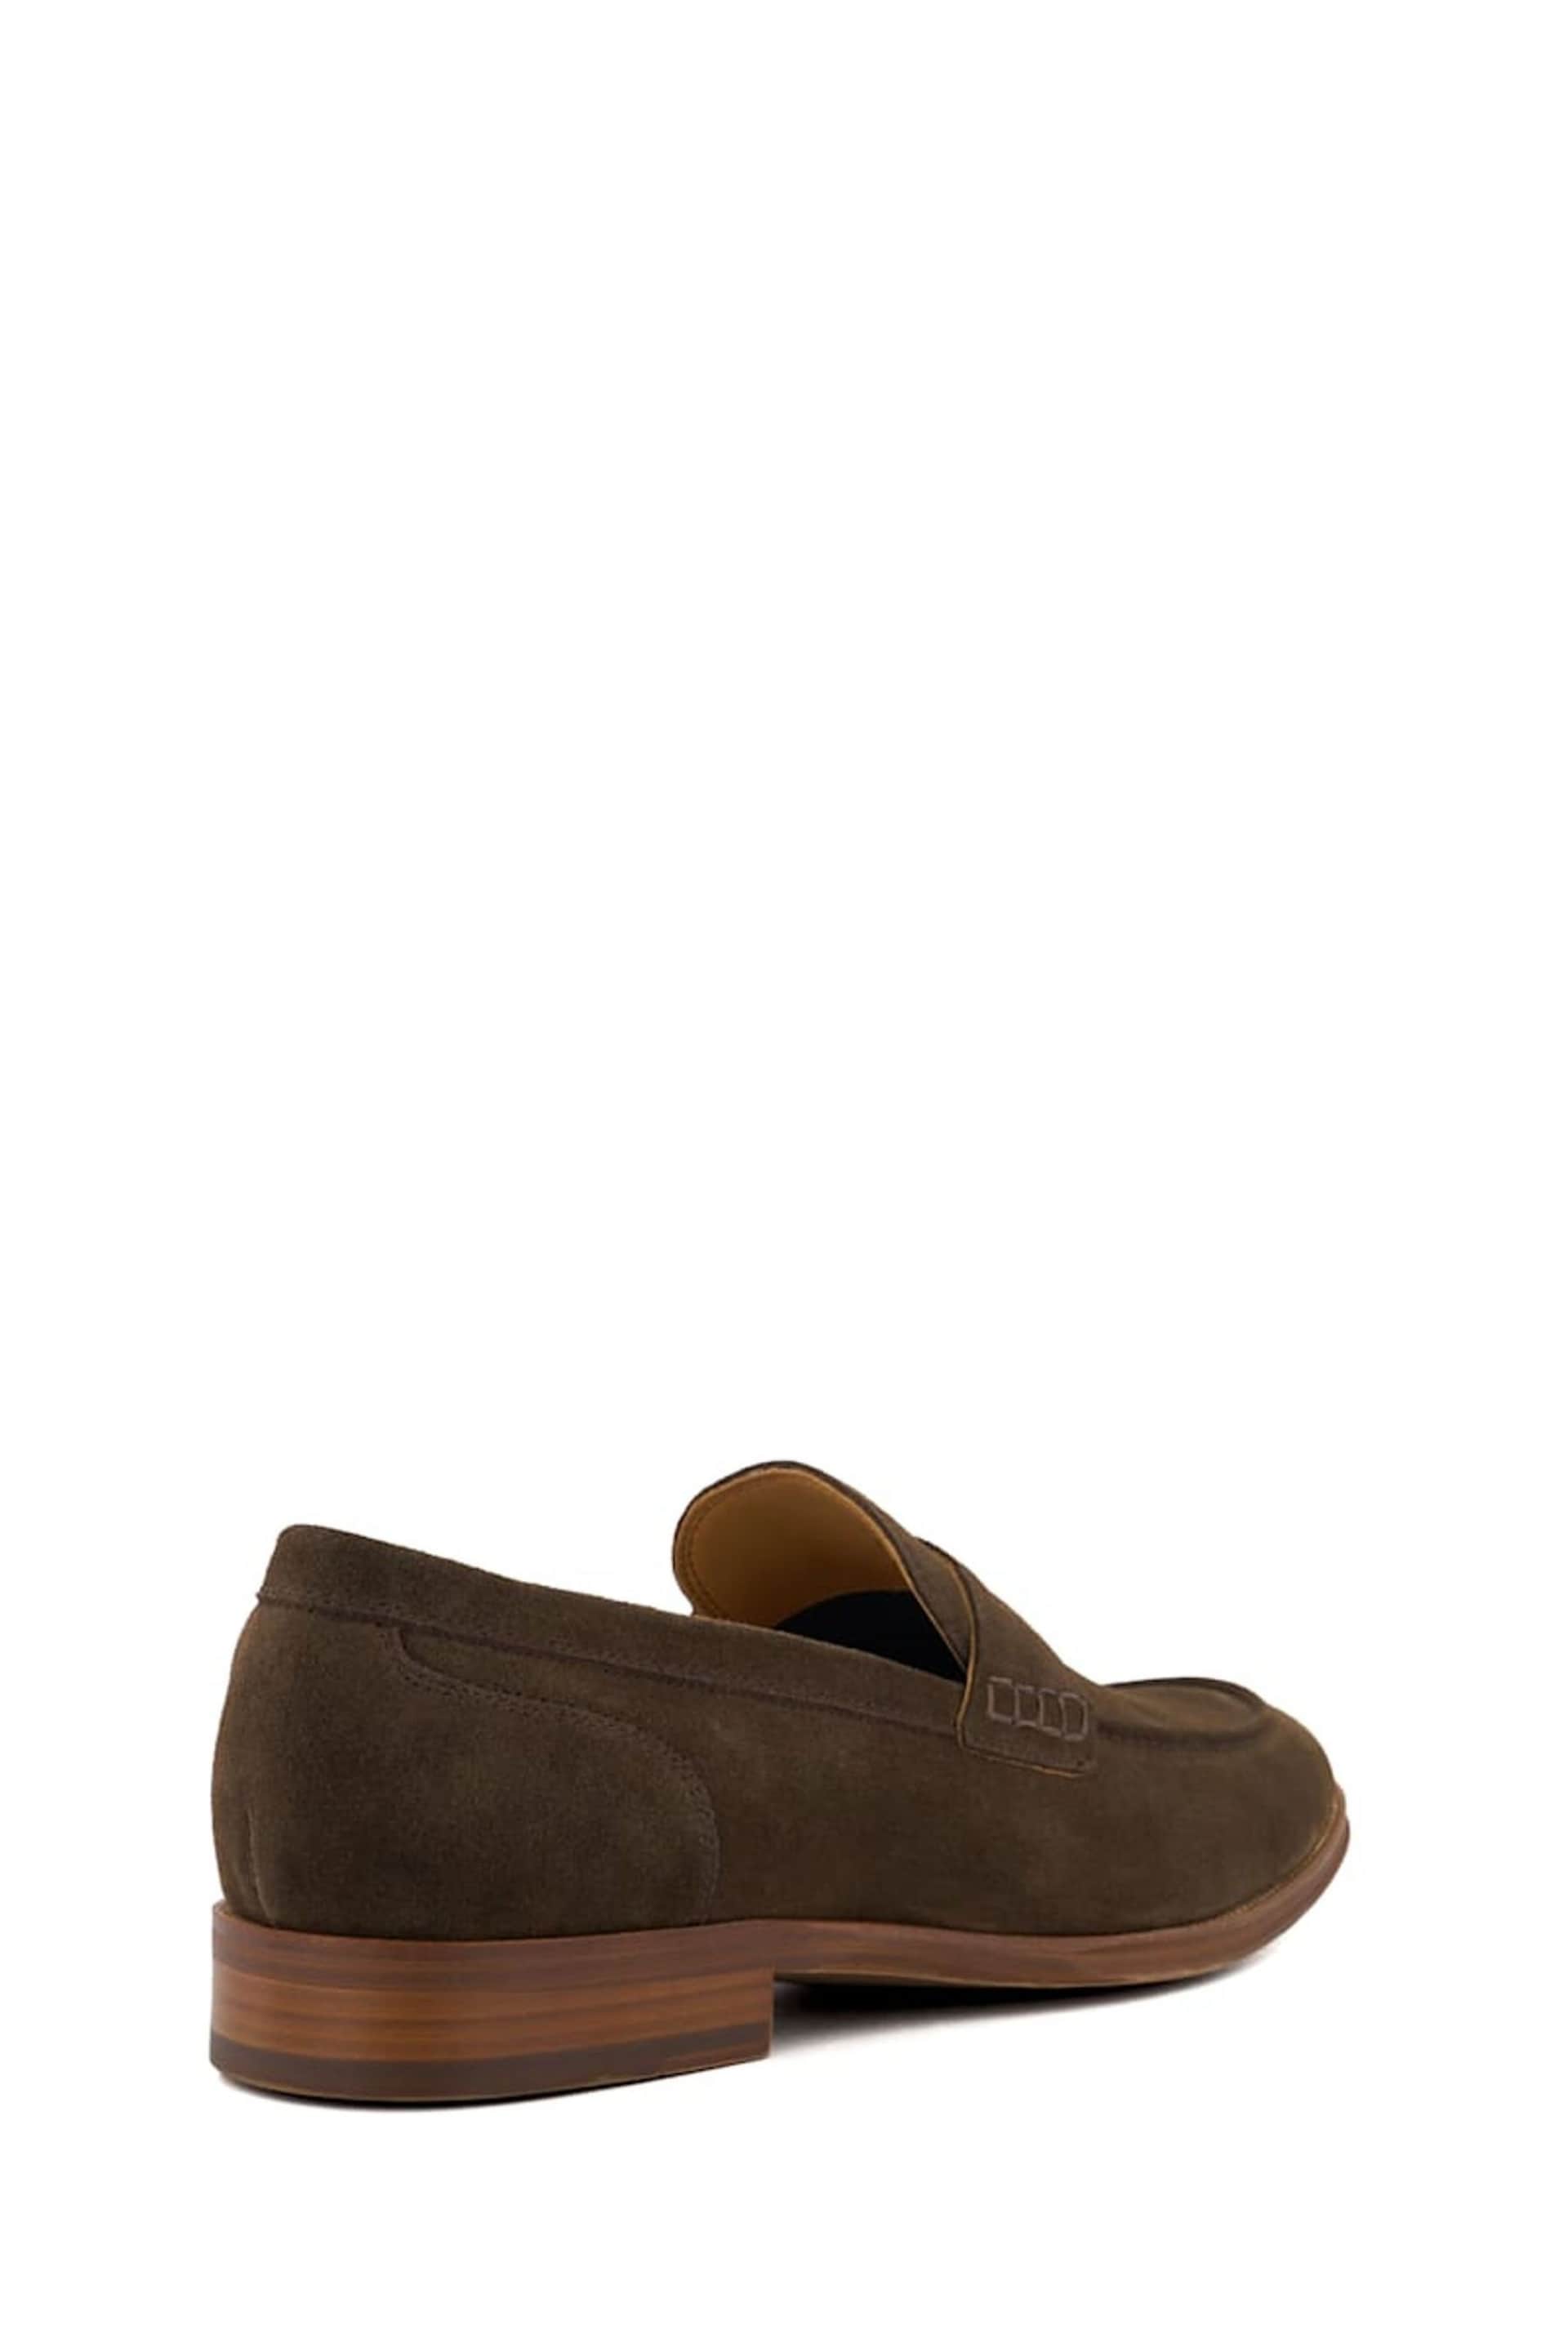 Dune London Brown Wide Fit Sulli Natural Sole Penny Loafers - Image 4 of 6